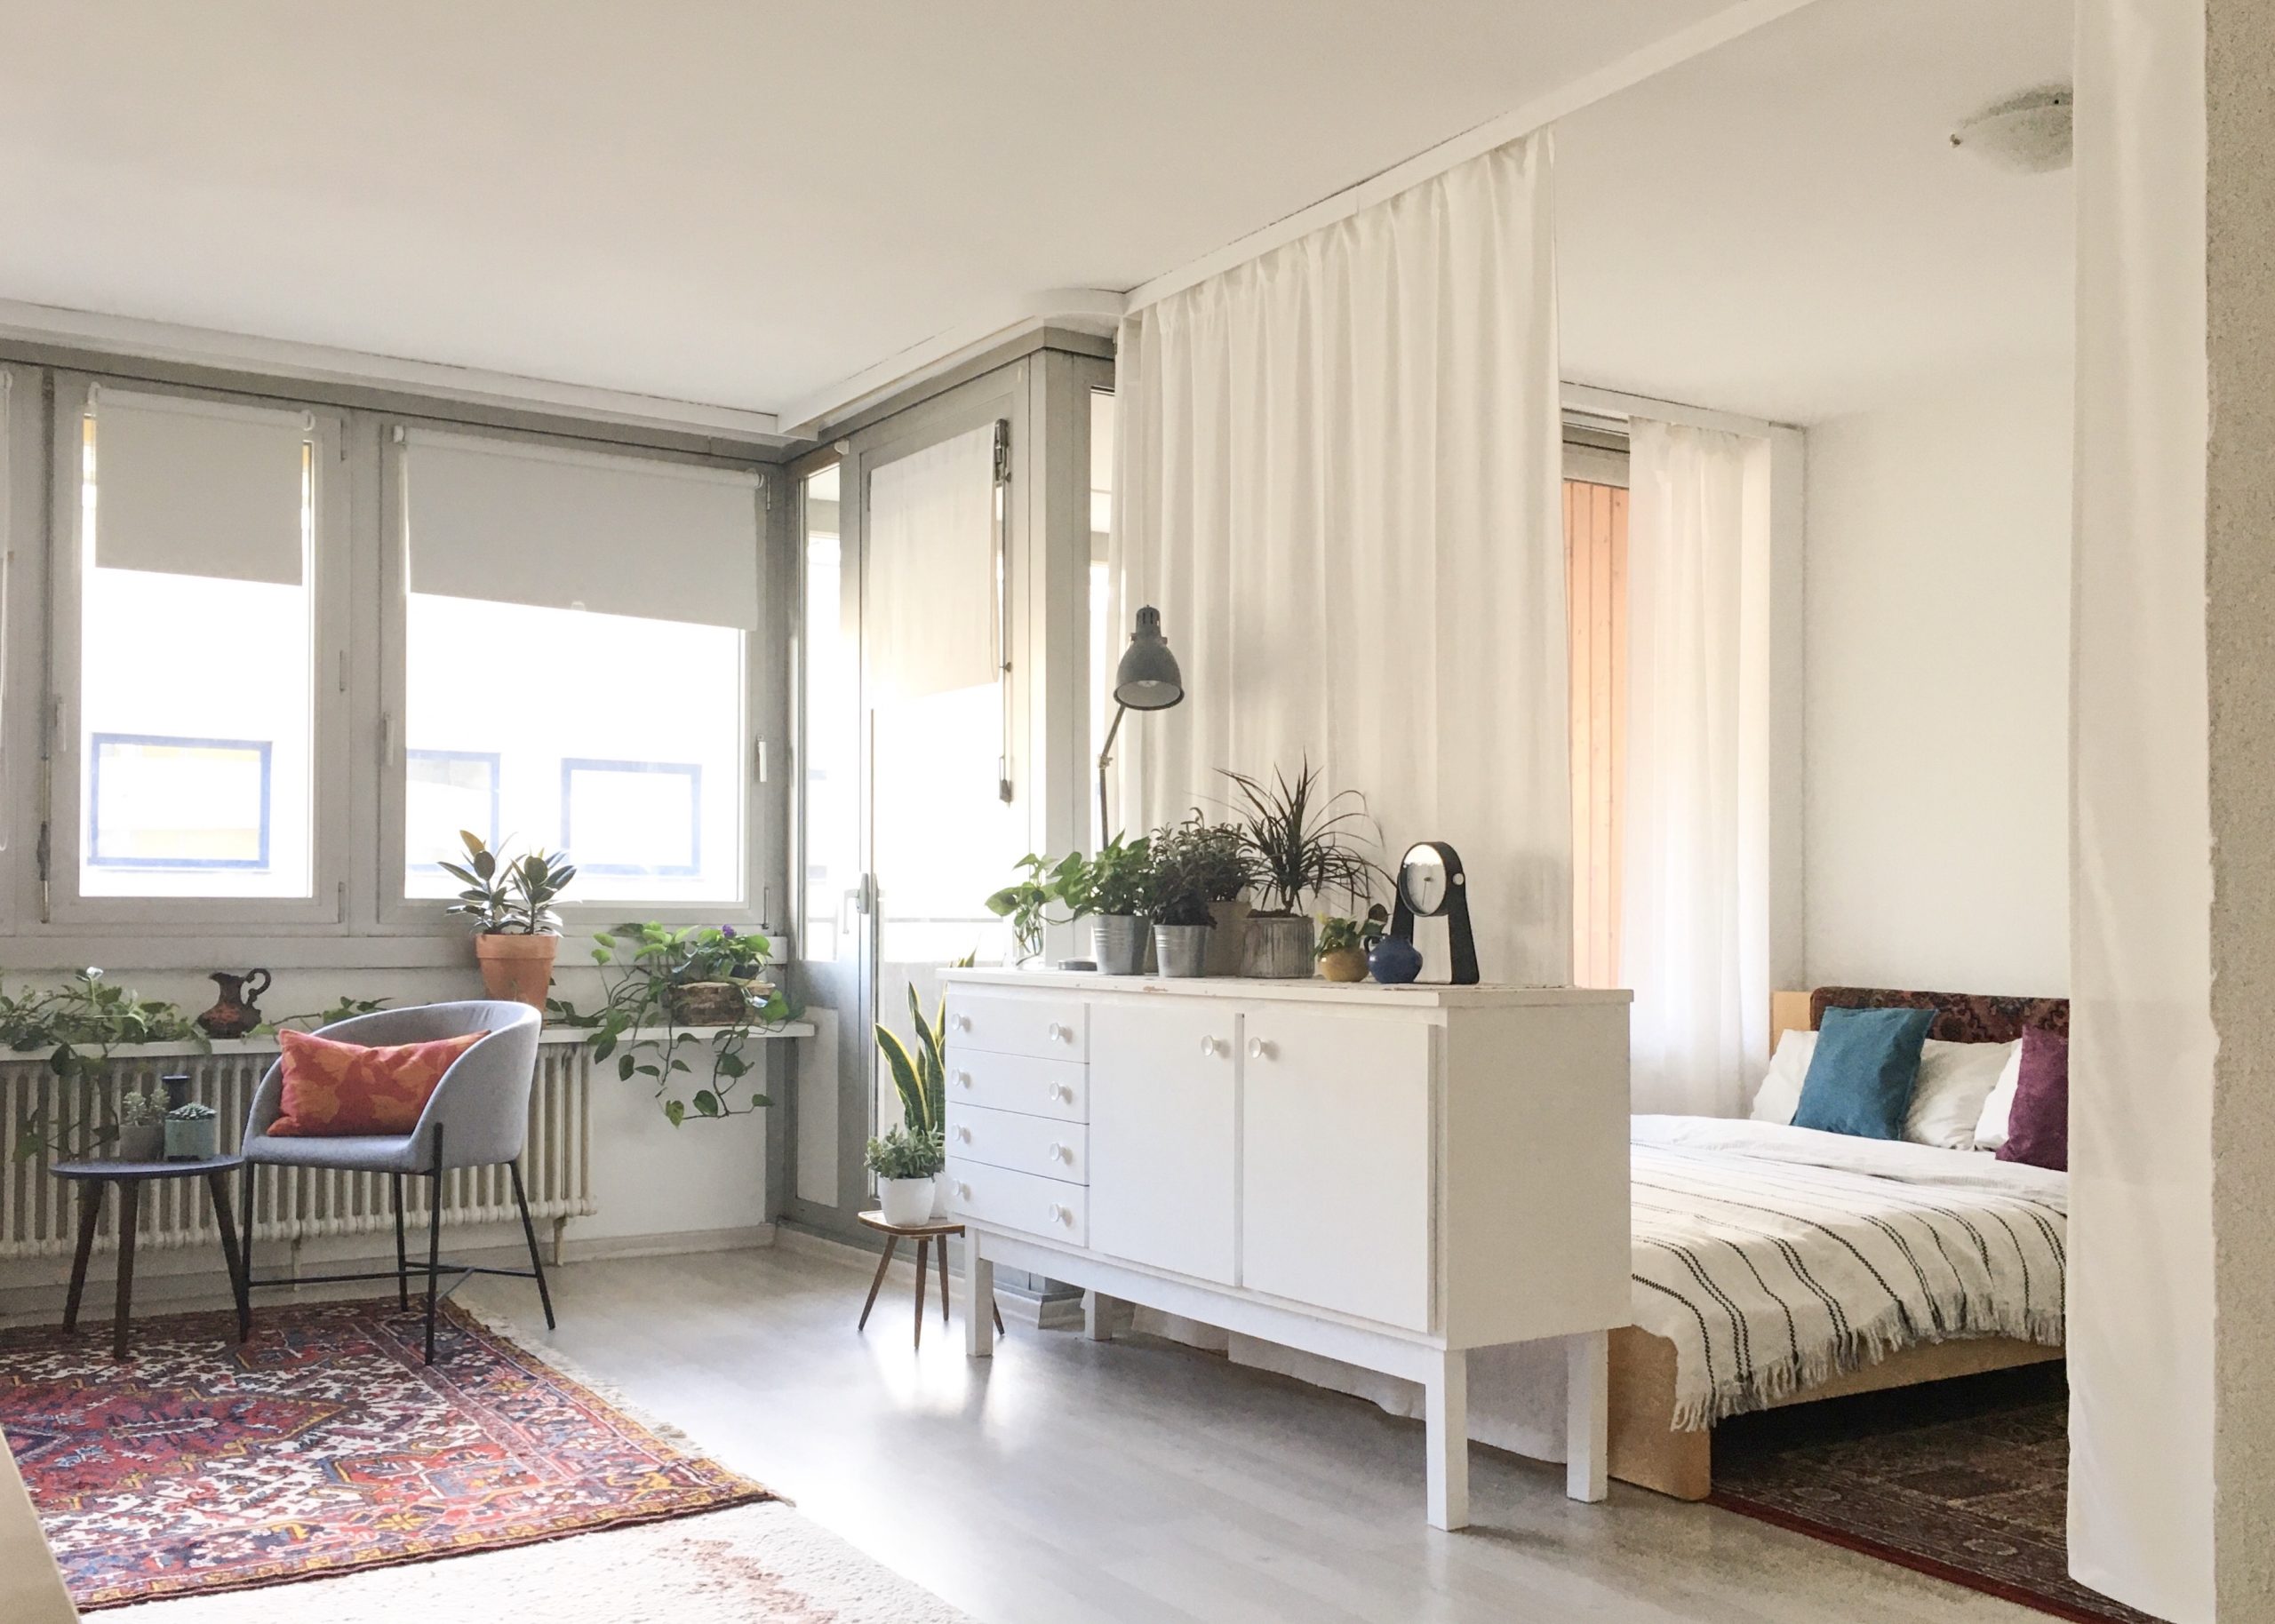 5 Ways To Make Your Studio Apartment Appear More Spacious